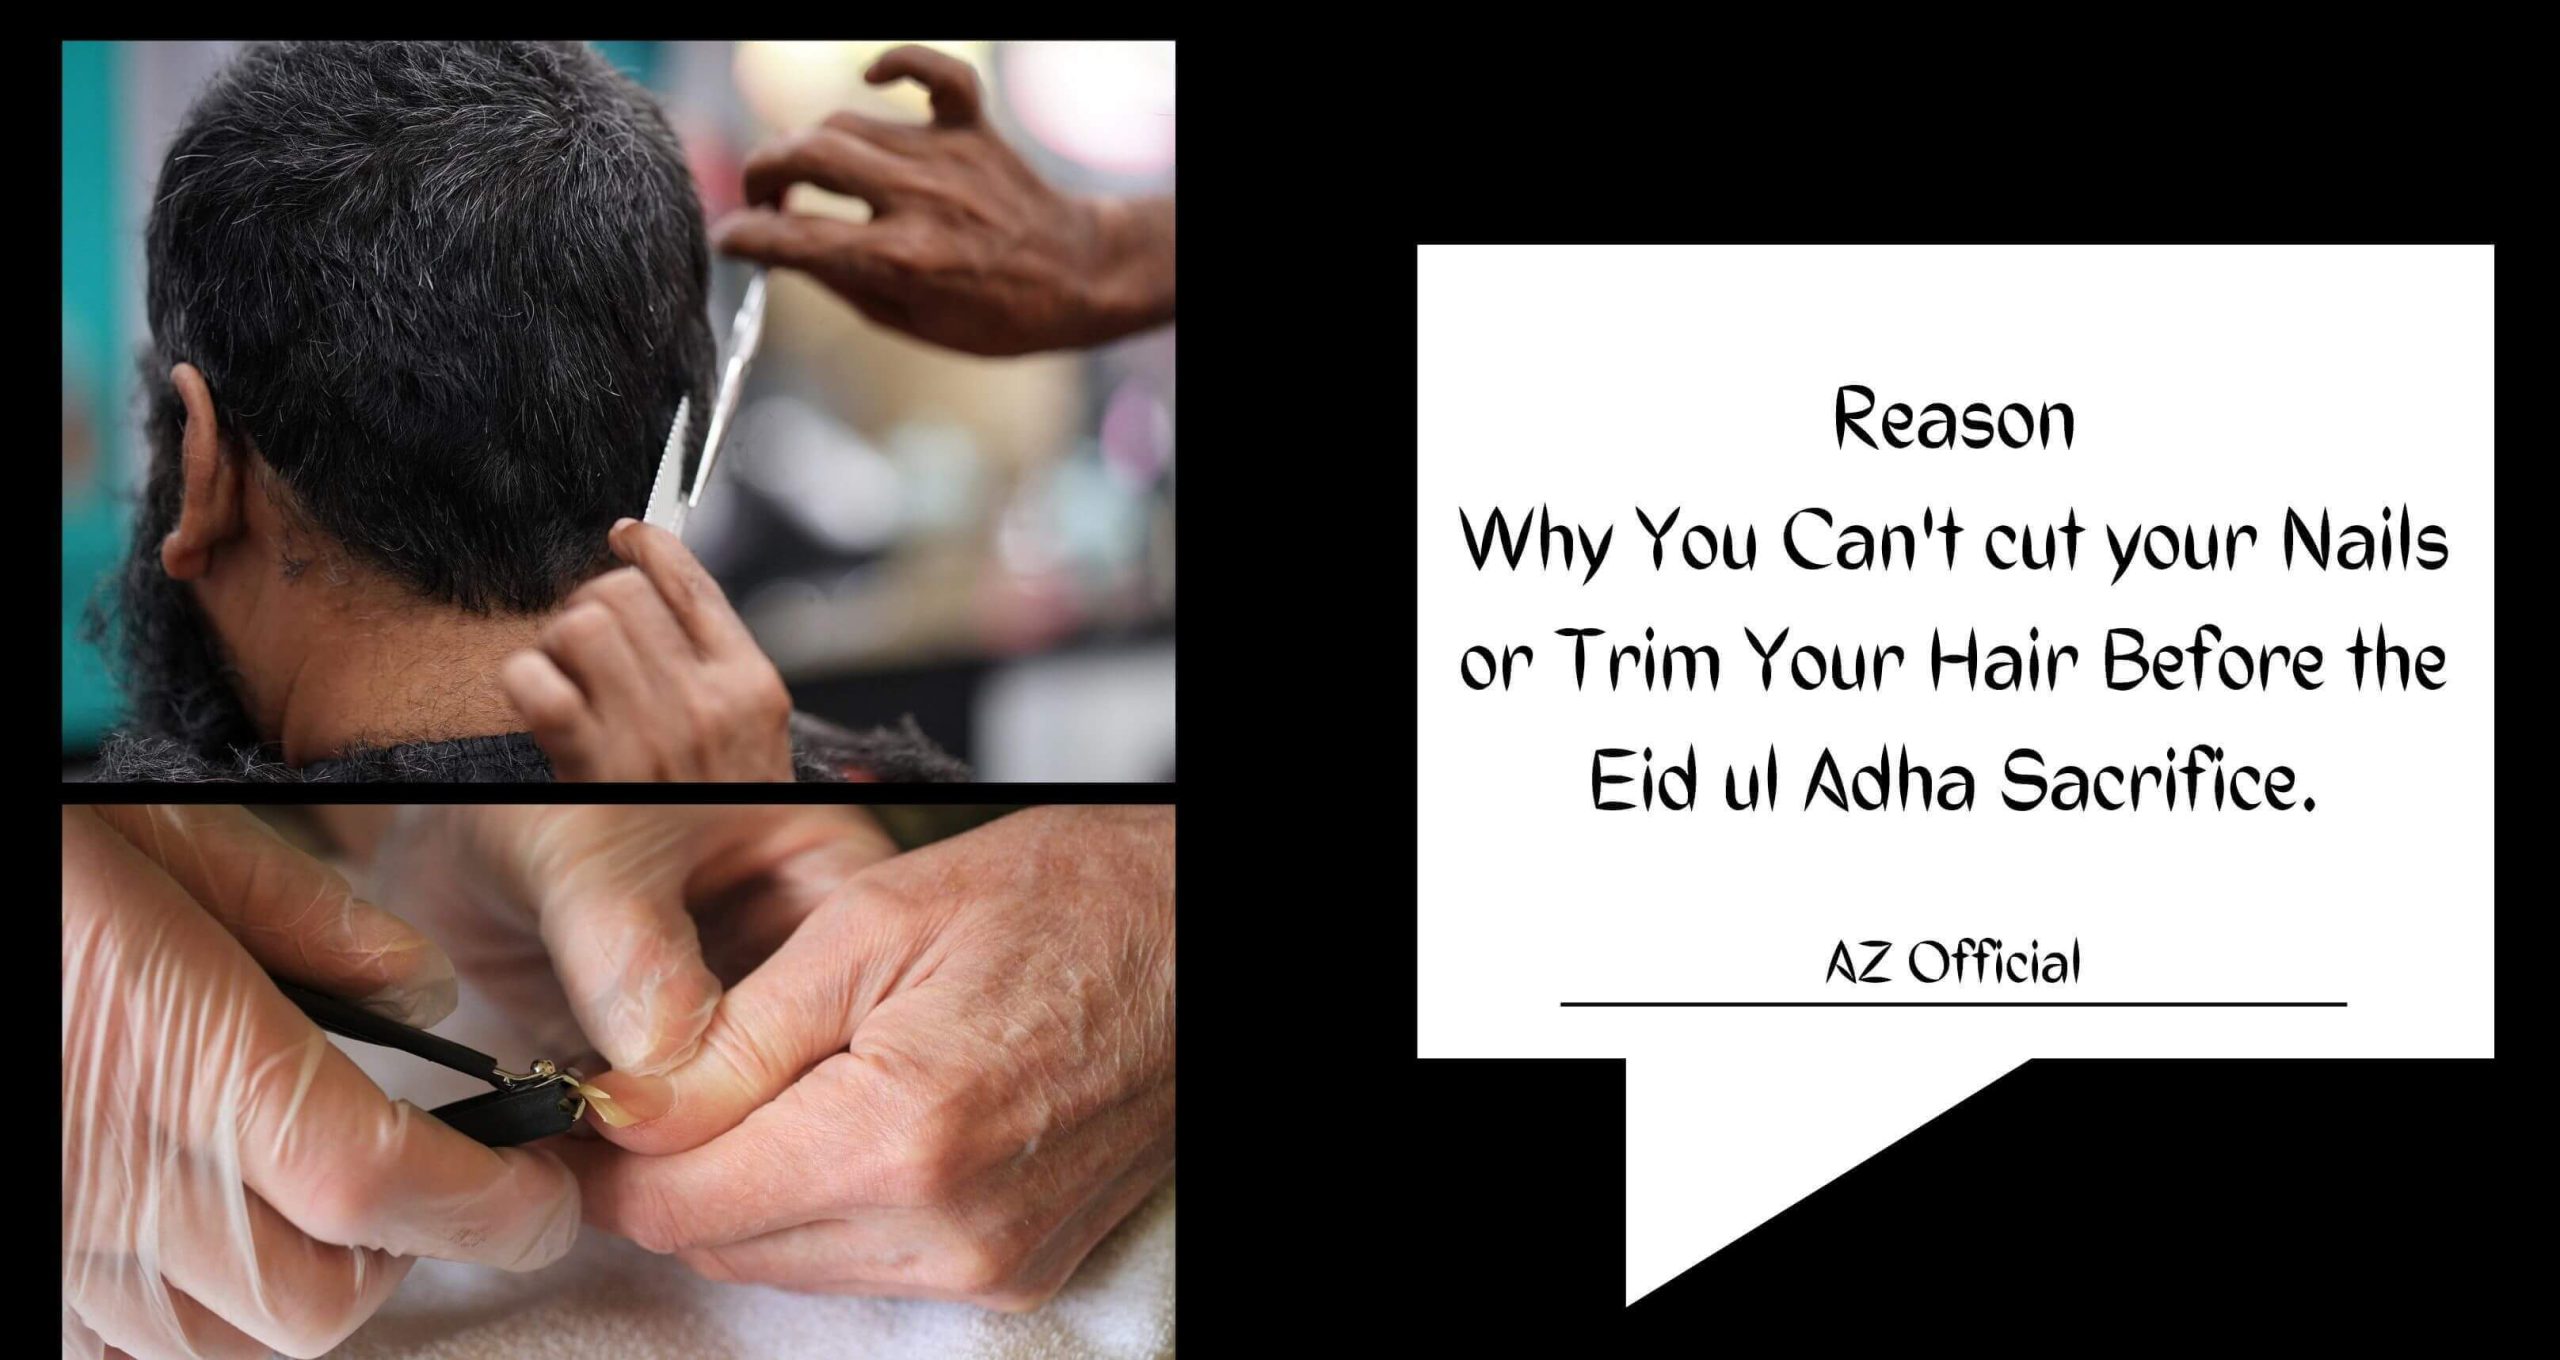 Hair And Nail Trimming Before Eid Ul Adha